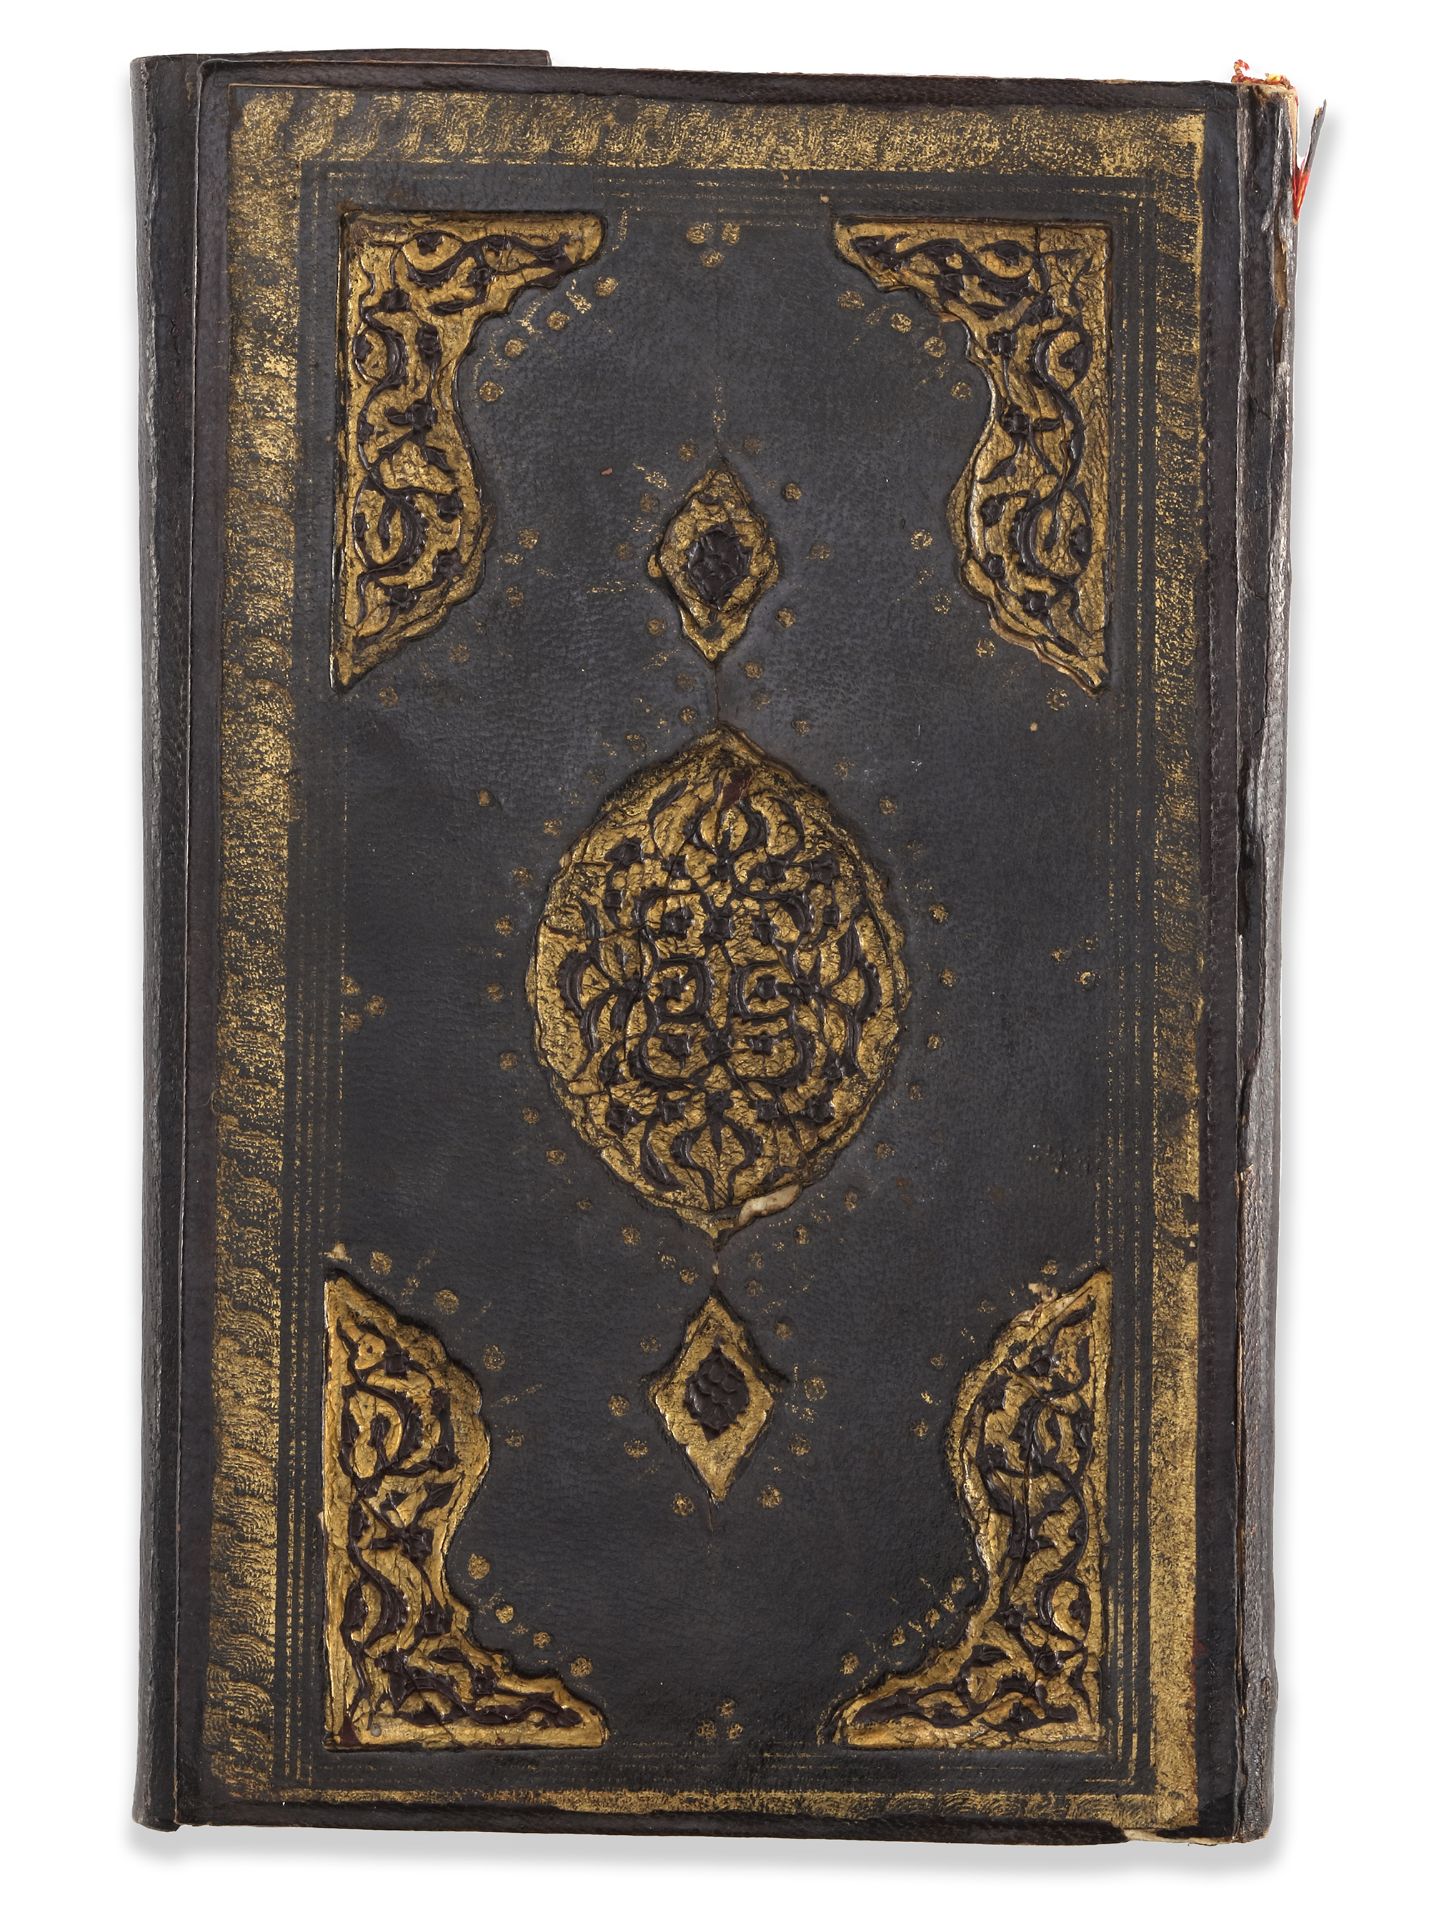 AN OTTOMAN QURAN SIGNED HOCAZADE MEHMED ENVERI, OTTOMAN TURKEY, DATED 1102 AH/1690 AD - Image 5 of 6